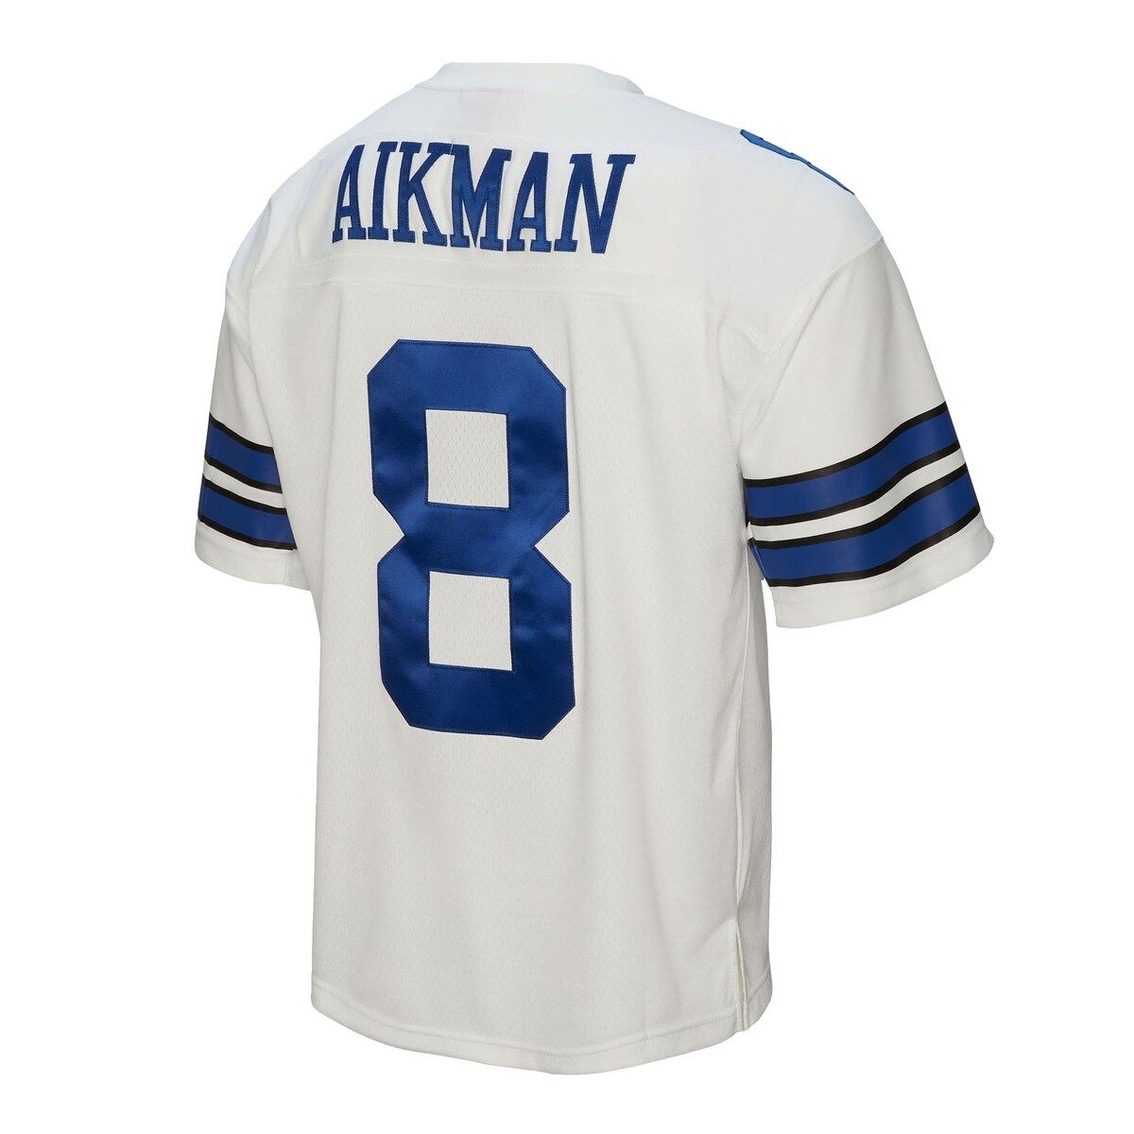 Mitchell & Ness Men's Troy Aikman White Dallas Cowboys Legacy Replica Jersey - Image 4 of 4